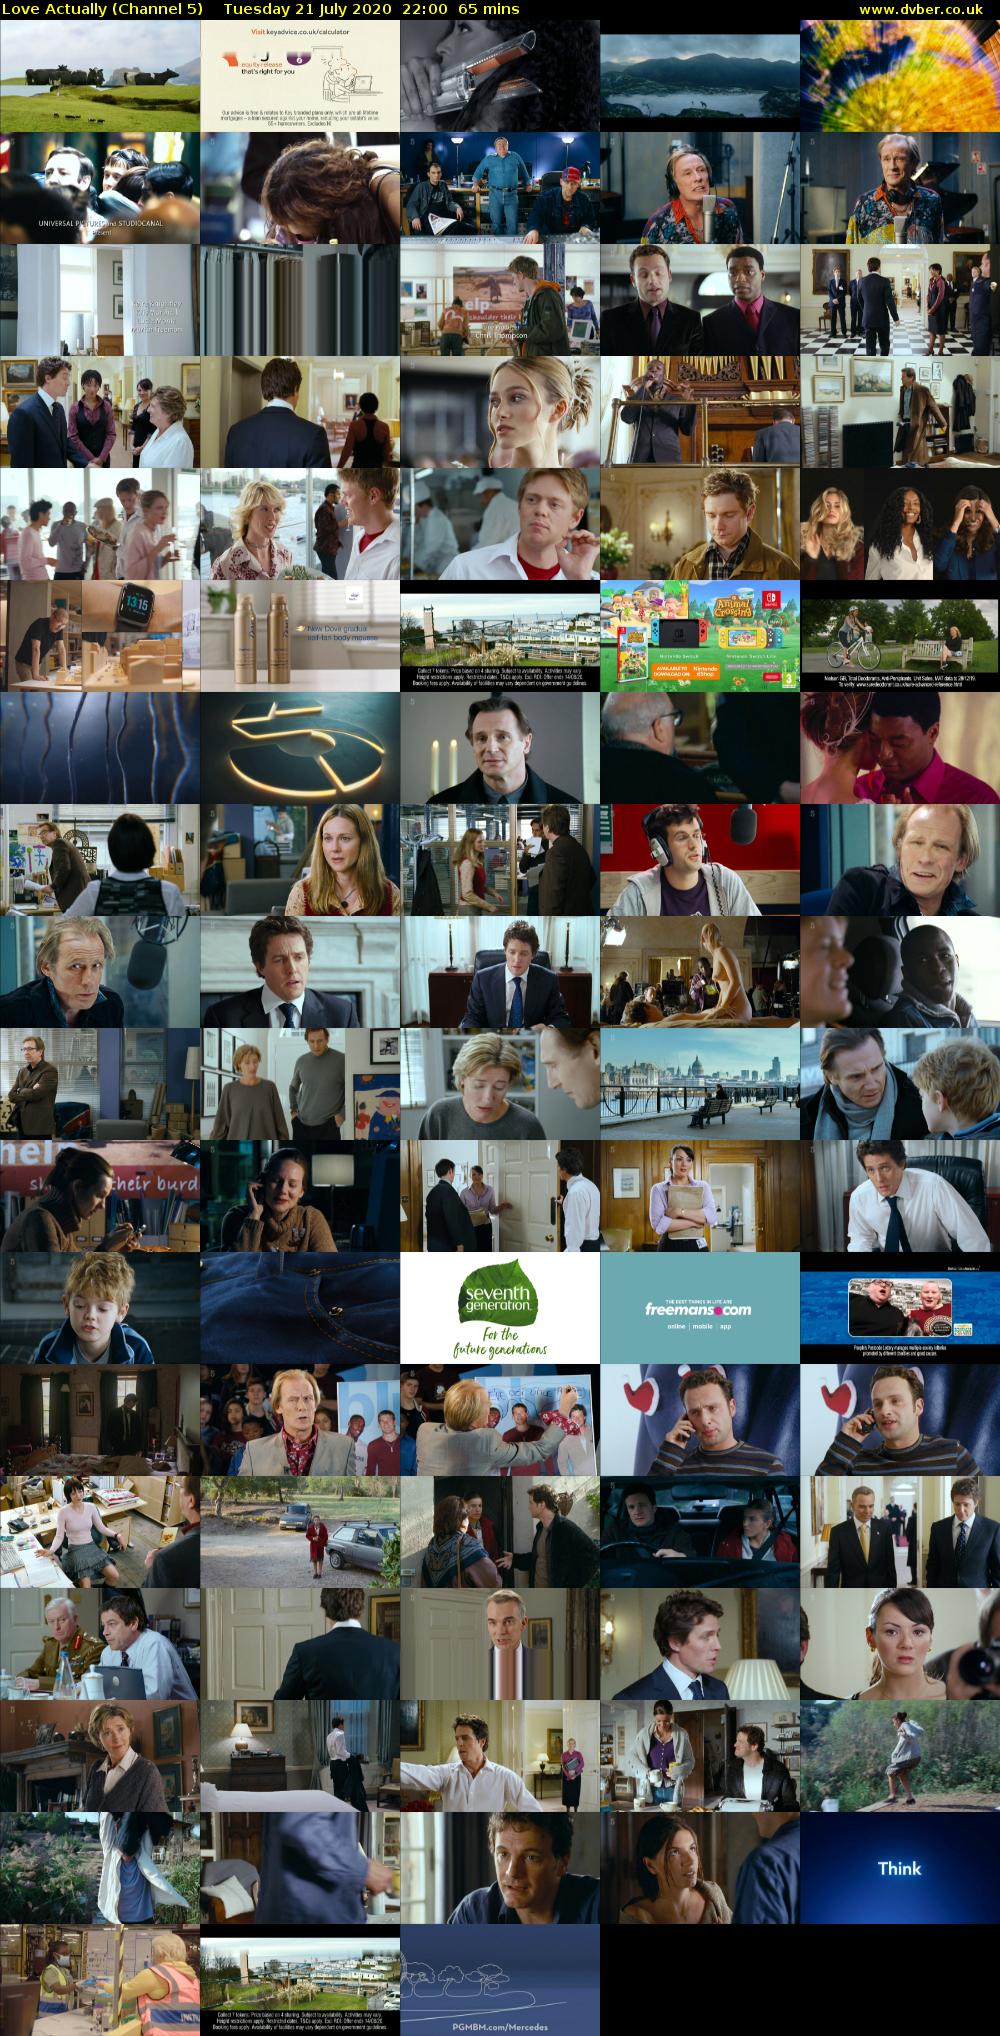 Love Actually (Channel 5) Tuesday 21 July 2020 22:00 - 23:05